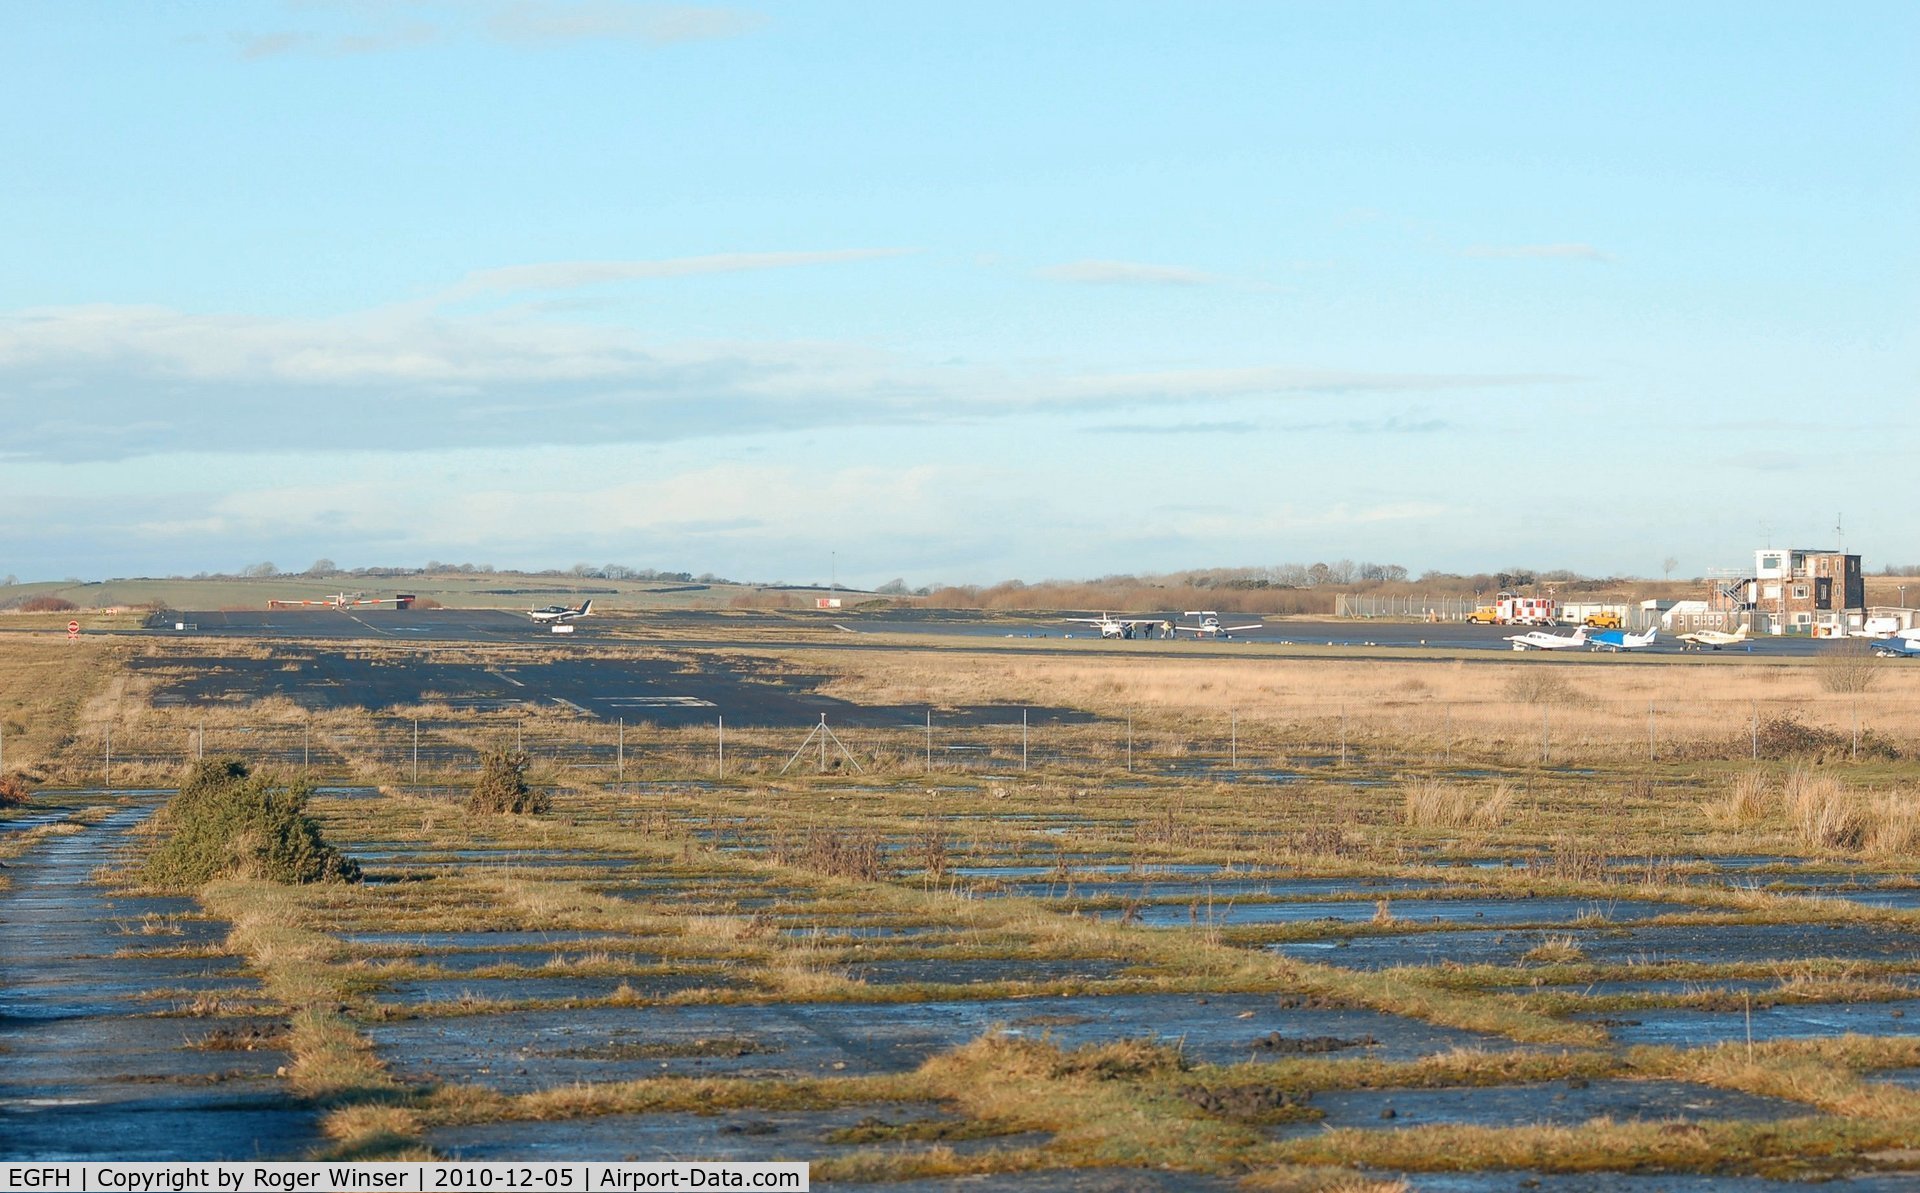 Swansea Airport, Swansea, Wales United Kingdom (EGFH) - Looking north west along the out of use Runway 15/33.